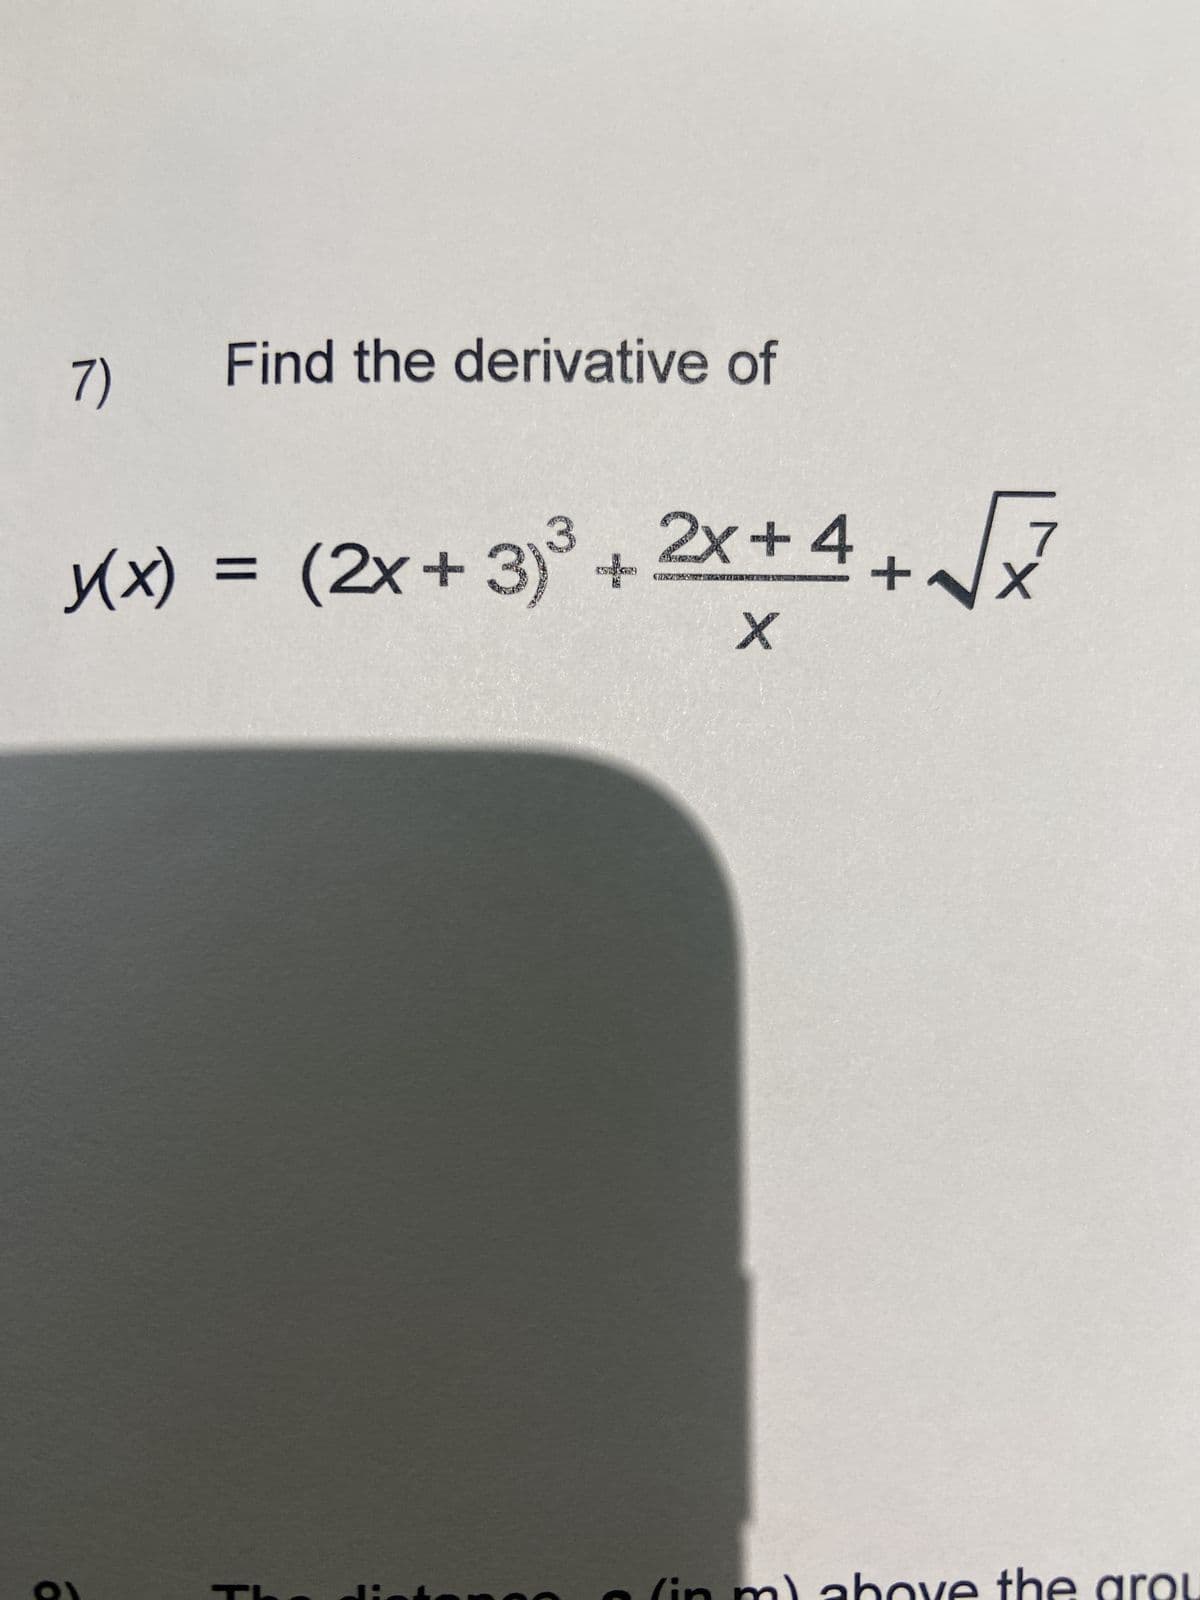 Find the derivative of
7)
x(x) = (2x+3)³ +
2x+4
+
X
the